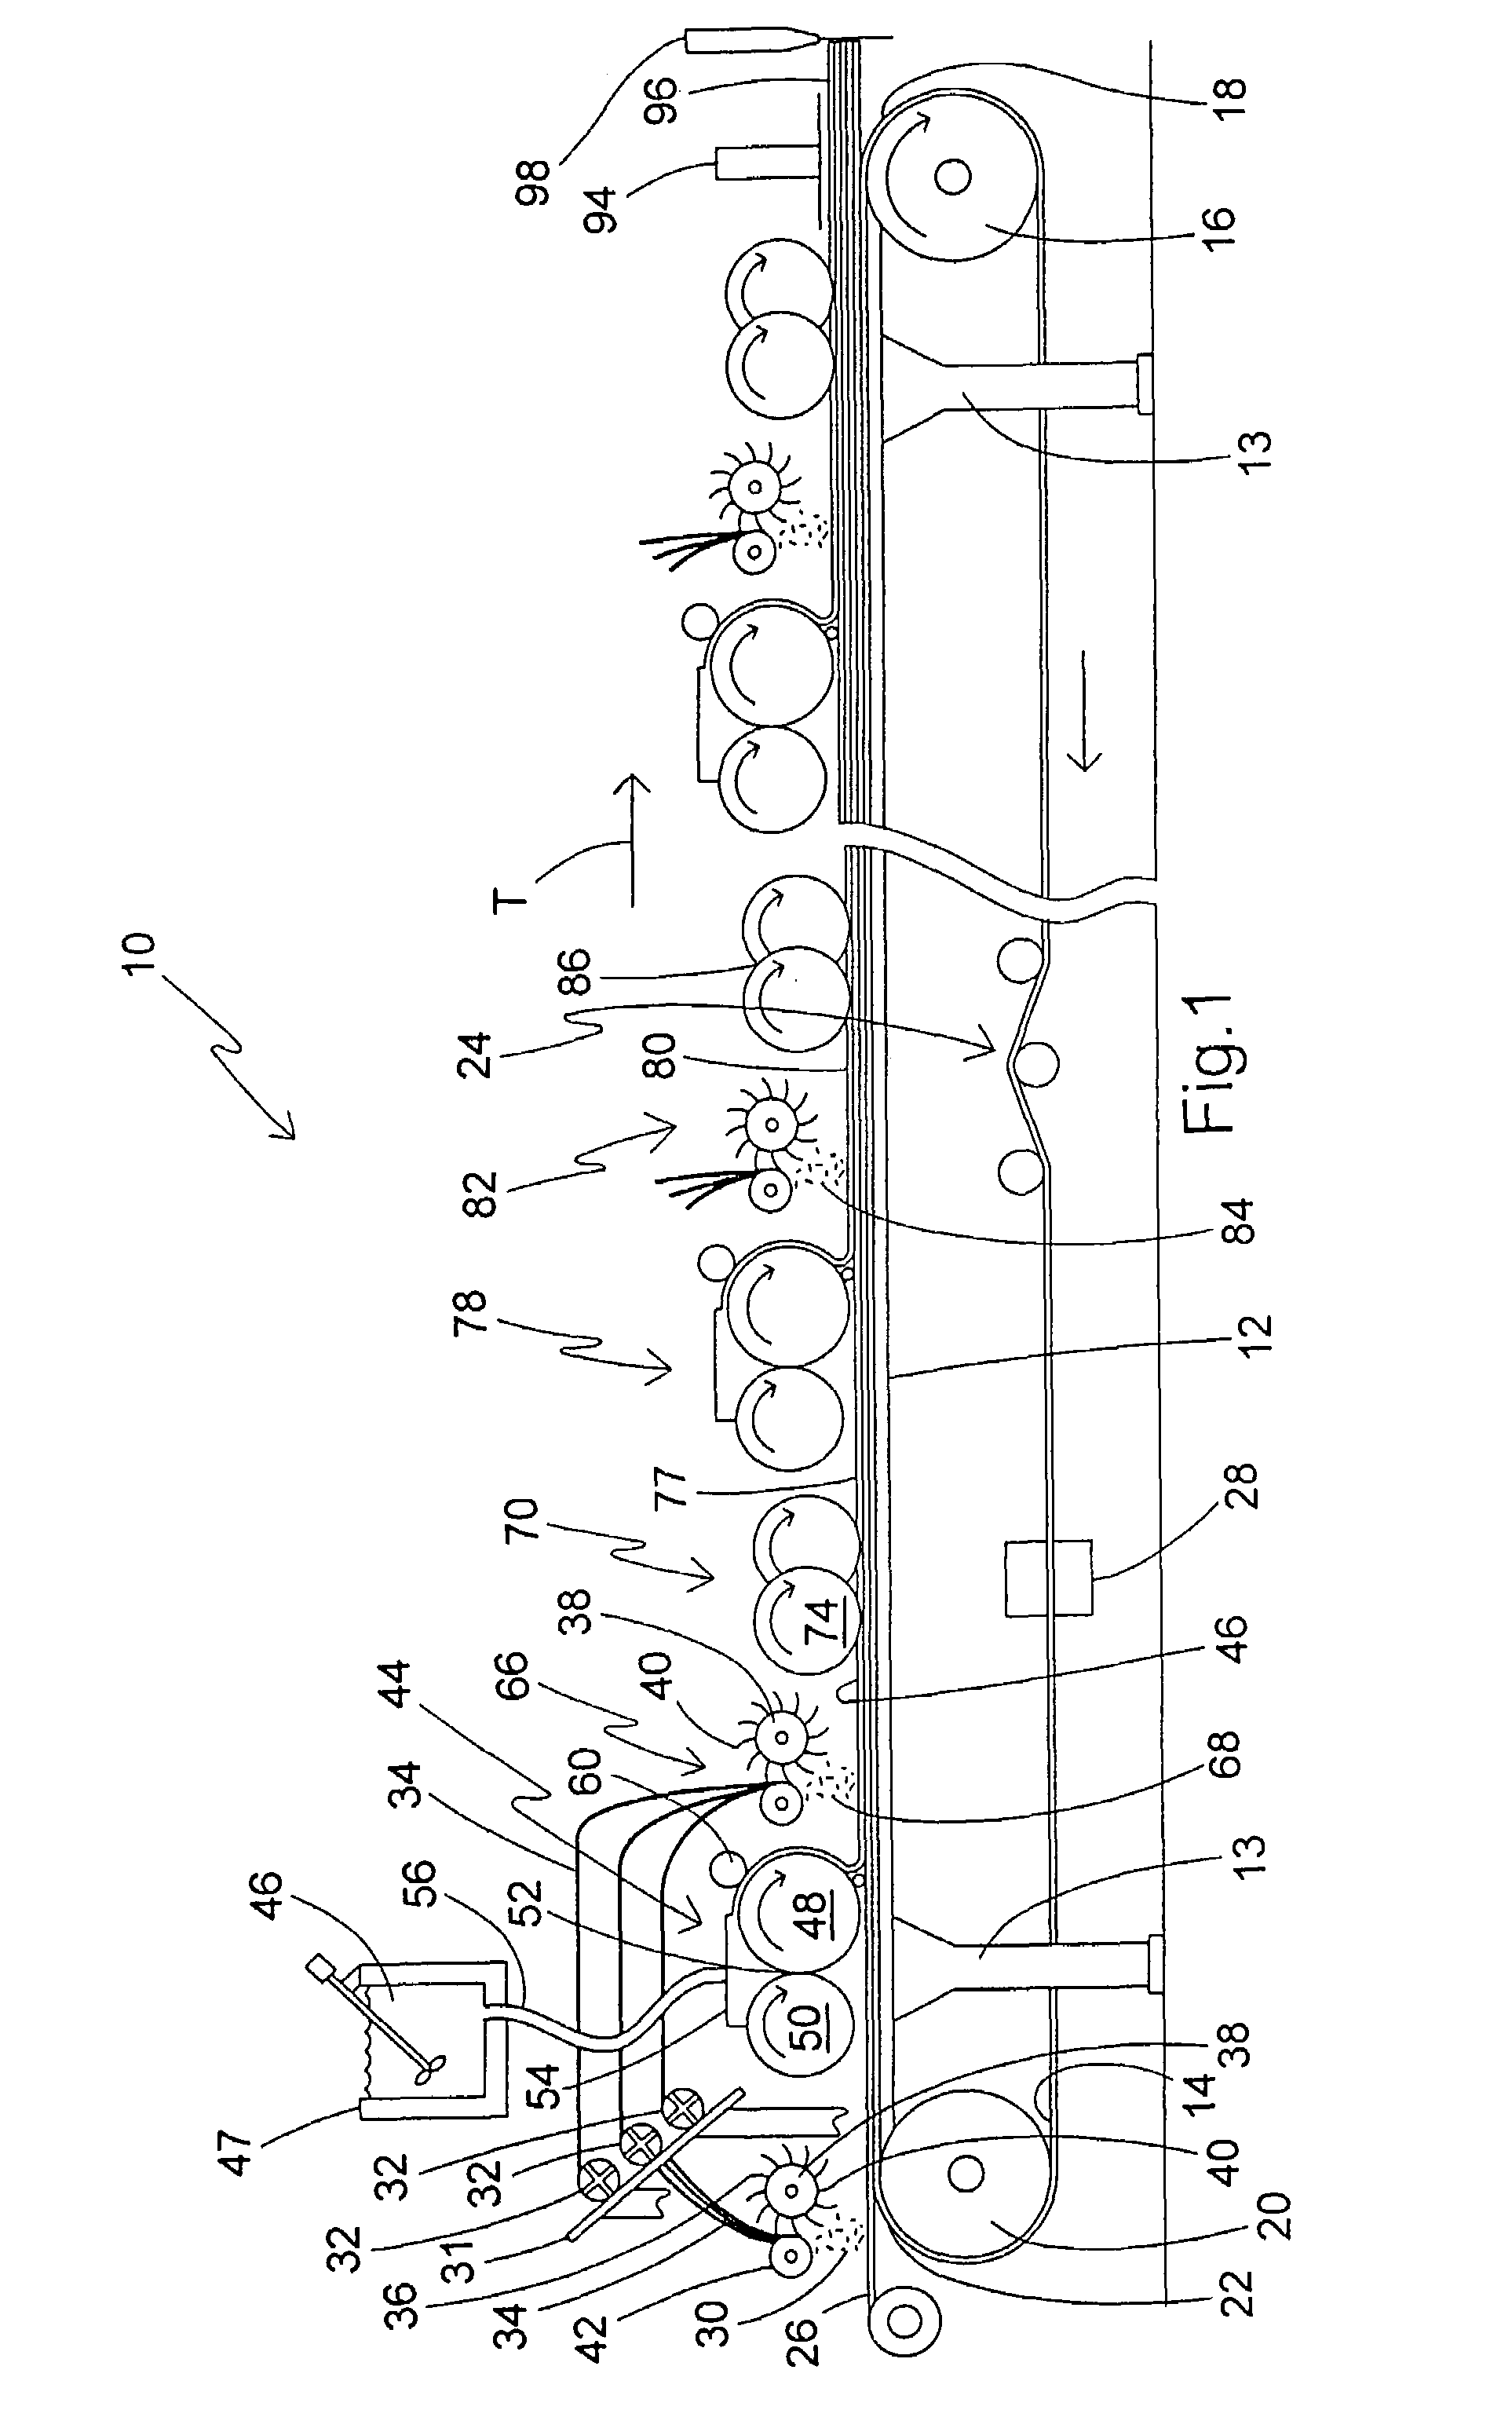 Multi-layer process and apparatus for producing high strength fiber-reinforced structural cementitious panels